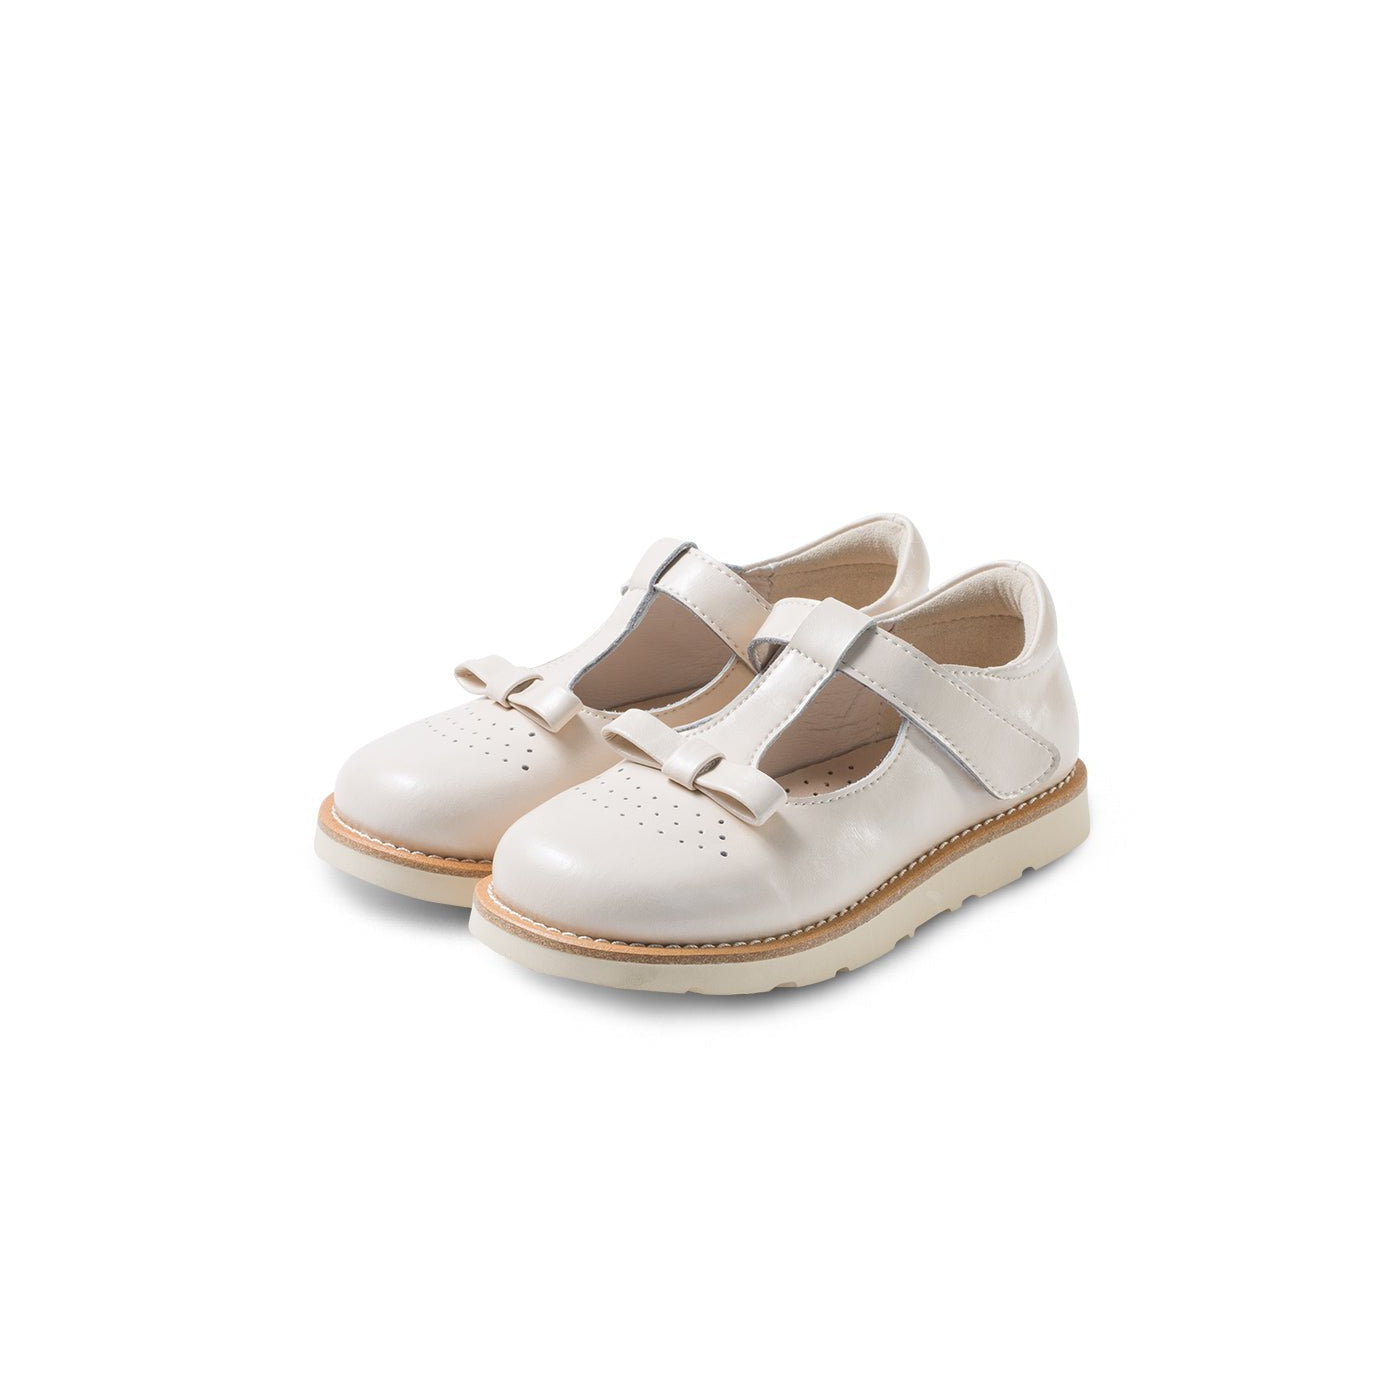 Little Bow Girl White Soft Sole T Bar Shoes